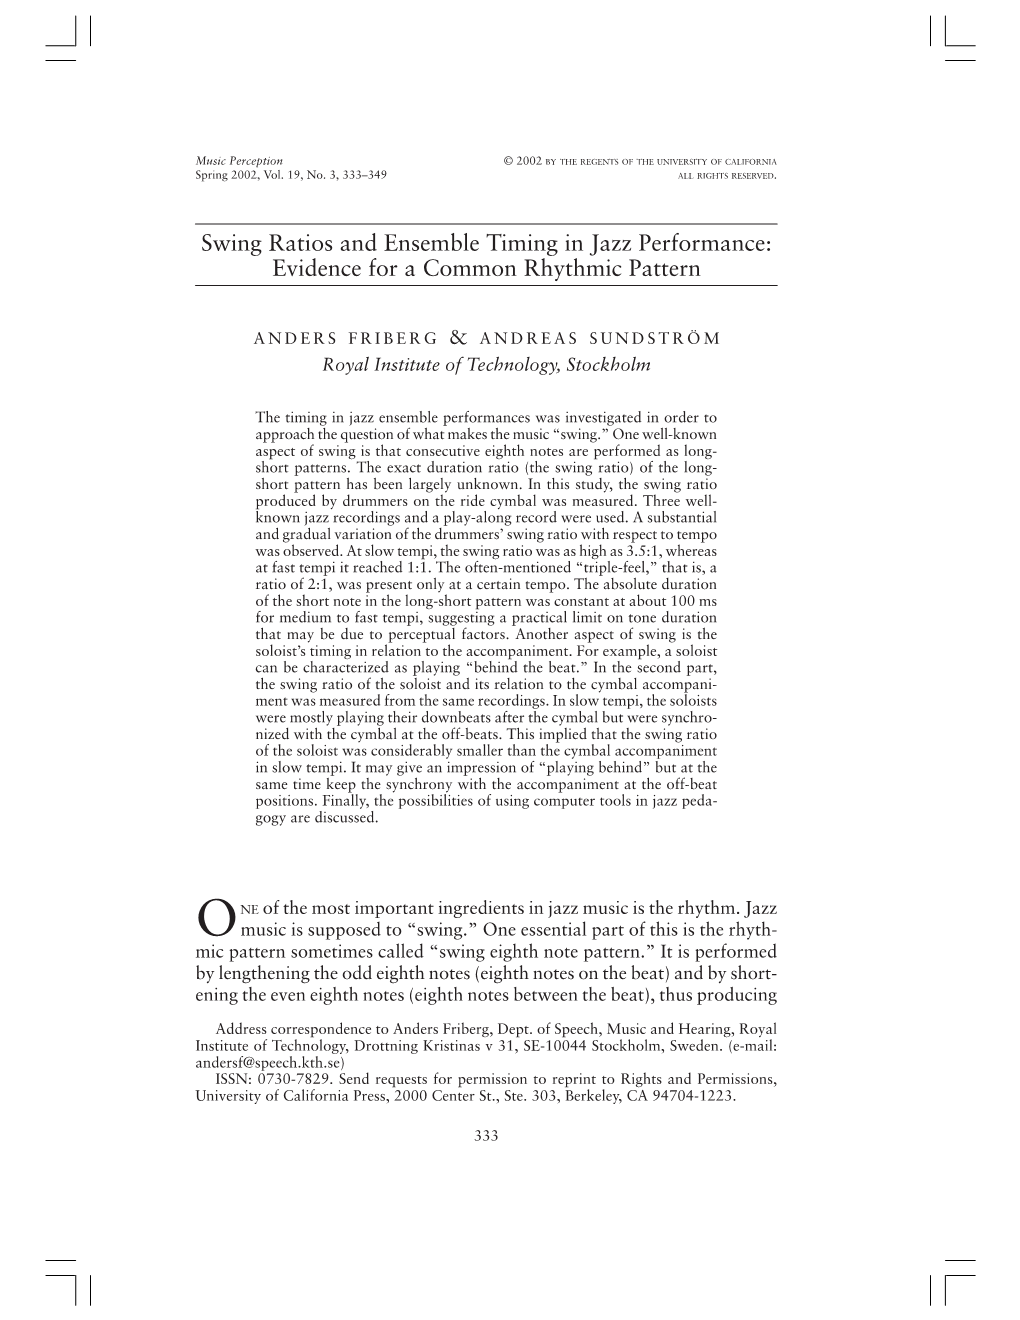 Swing Ratios and Ensemble Timing in Jazz Performance: Evidence for a Common Rhythmic Pattern